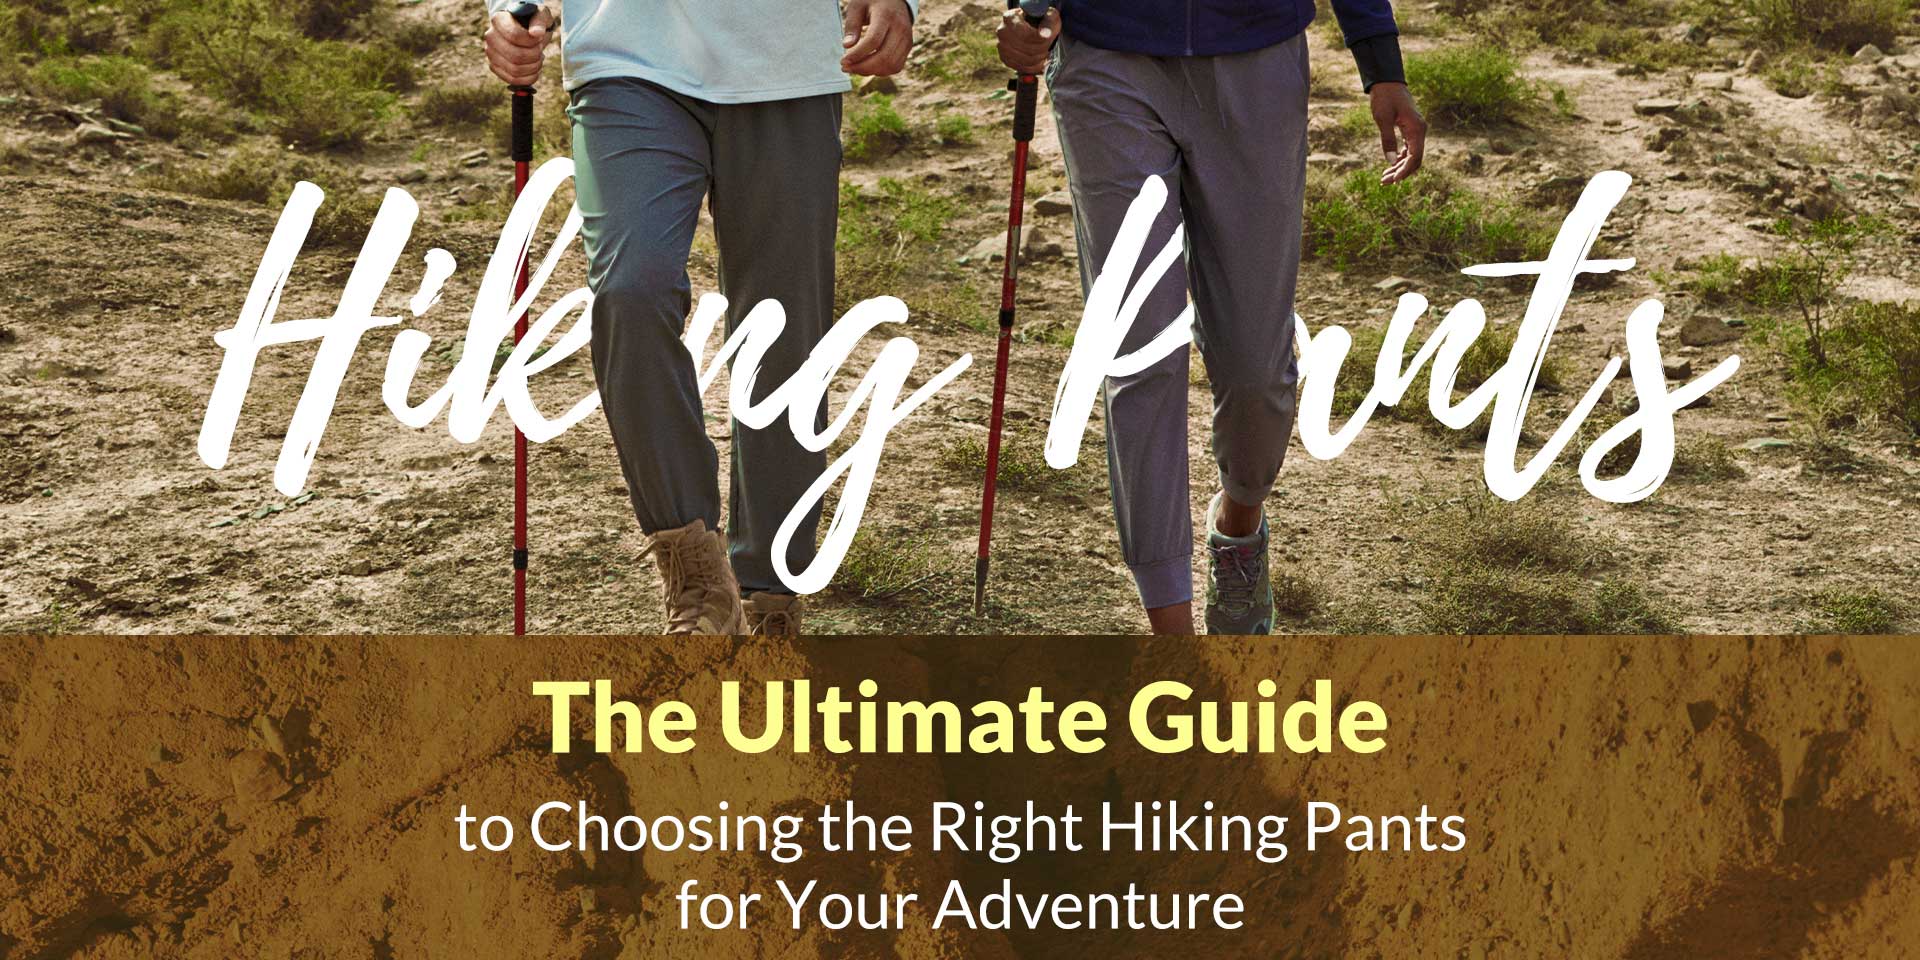 The Ultimate Guide to Choosing the Right Hiking Pants for Your Adventure